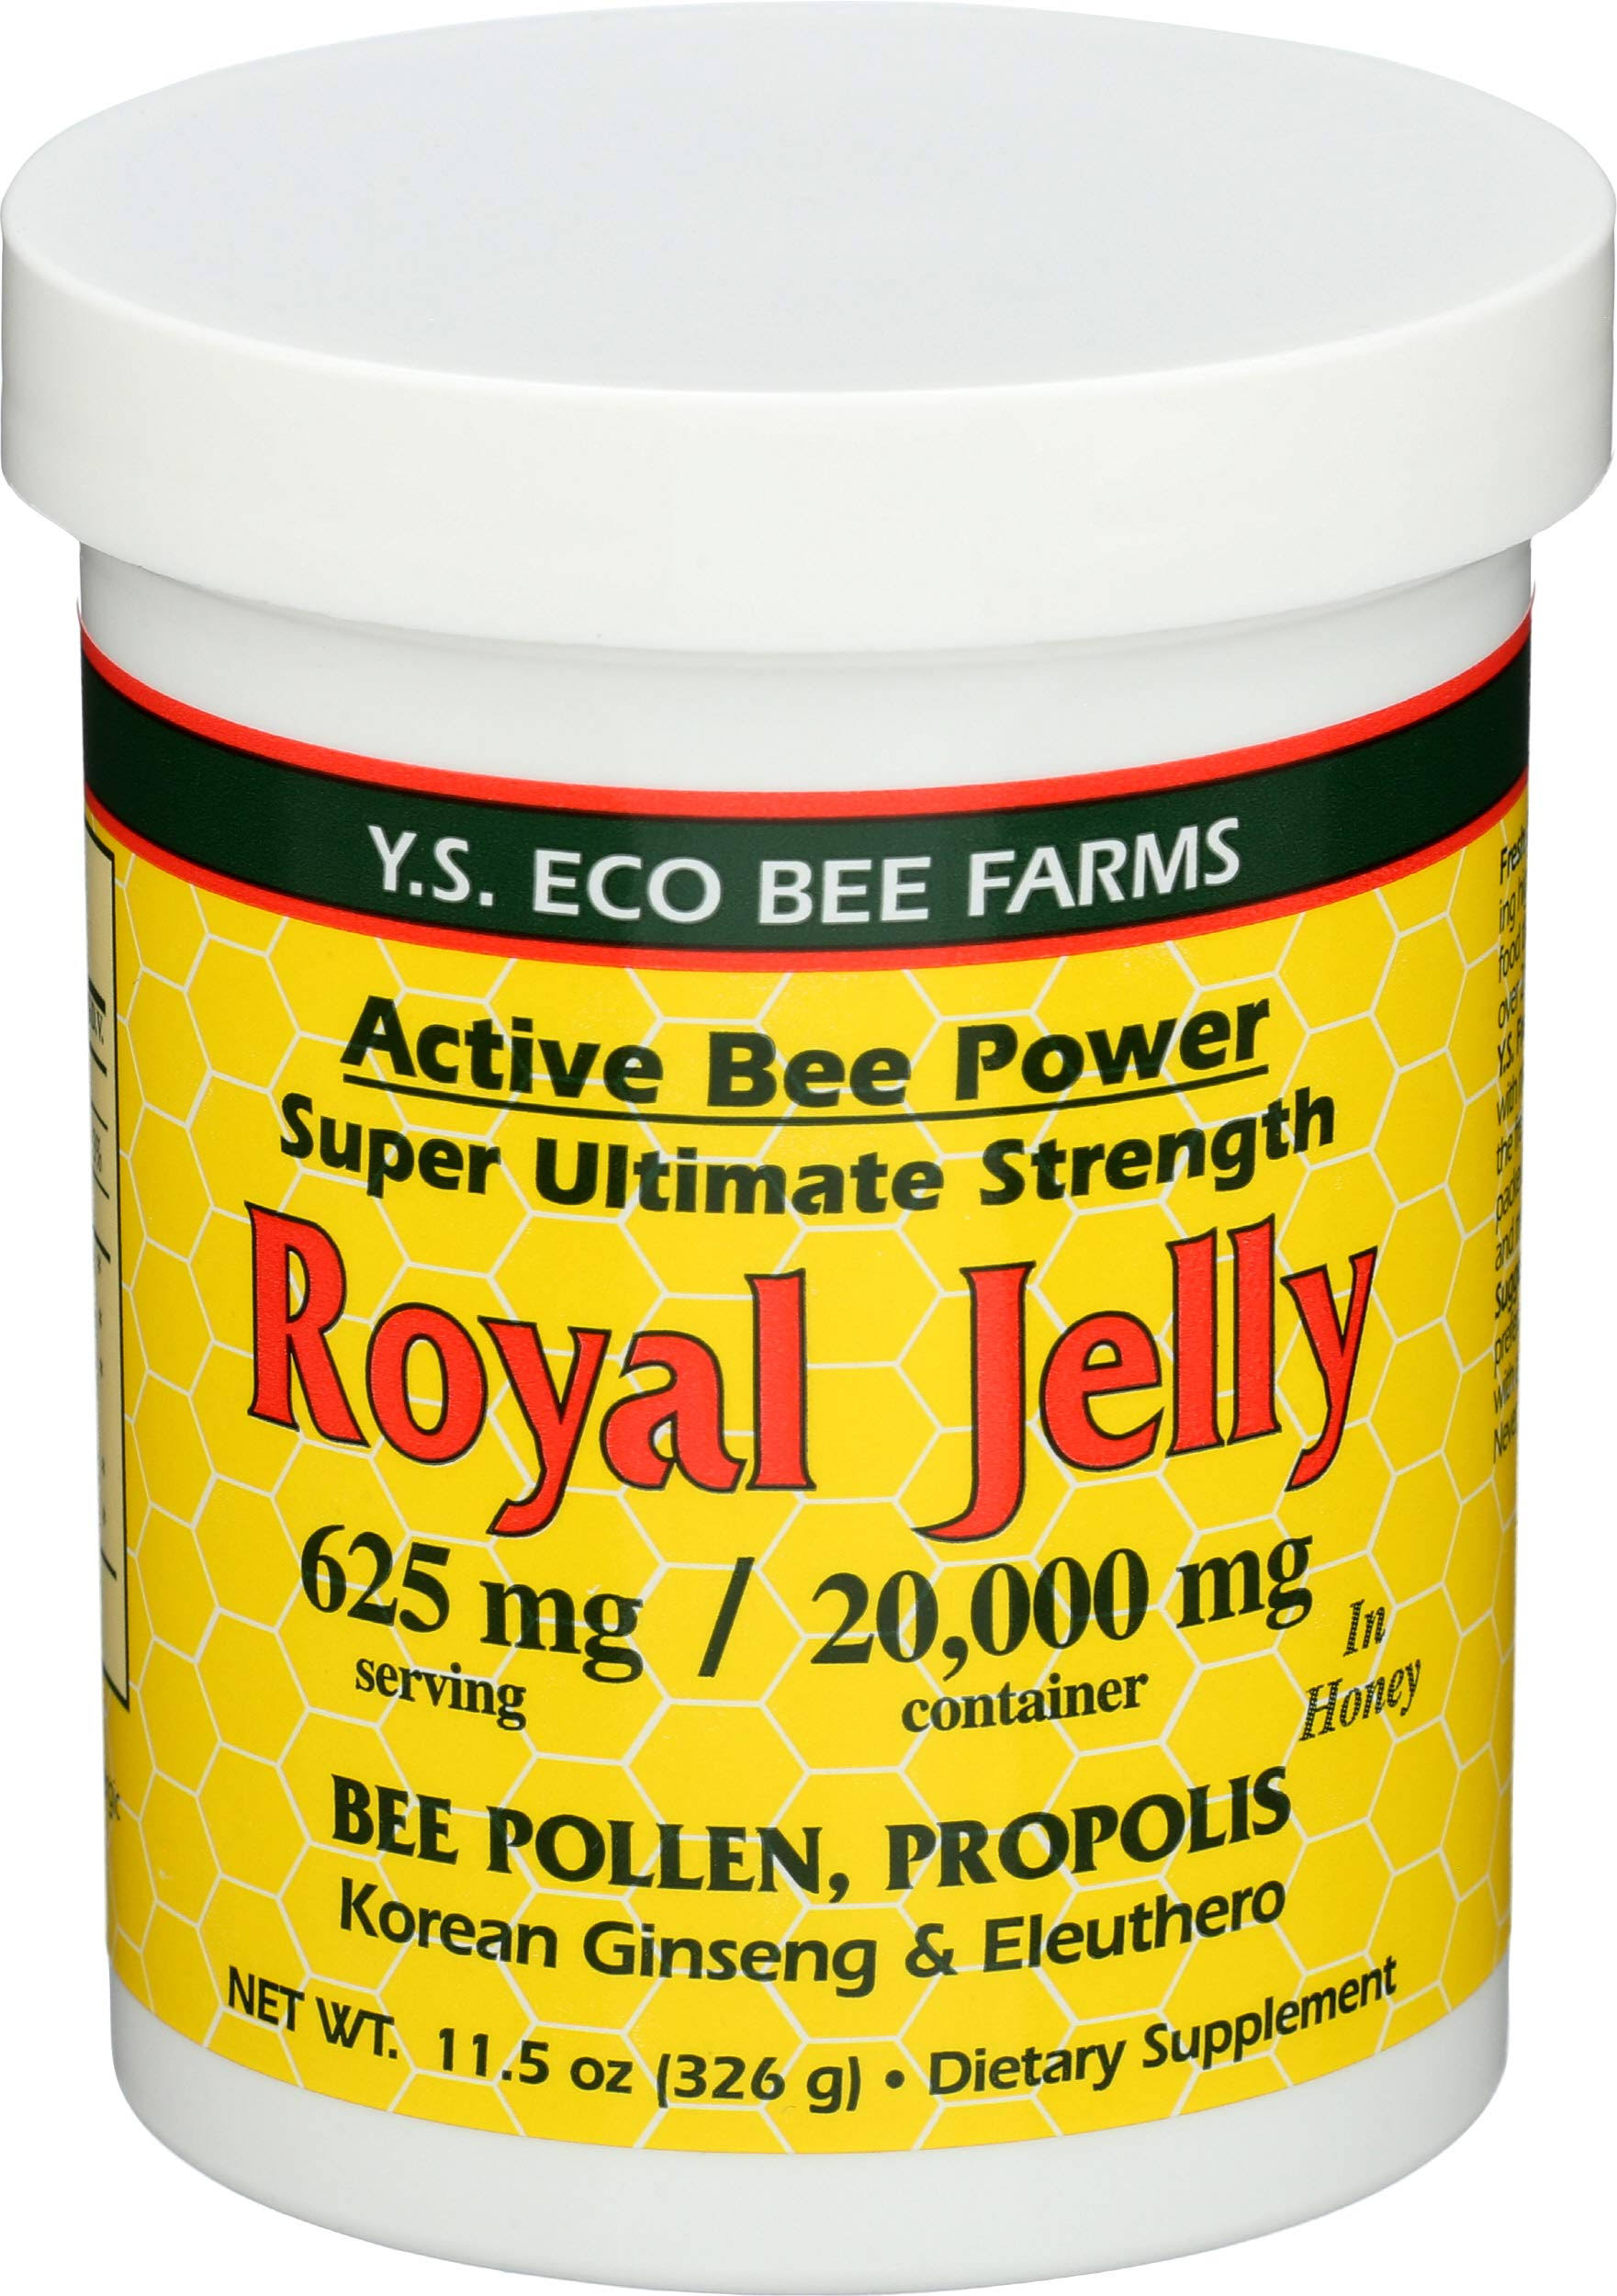 Y.S. Eco Bee Farms Royal Jelly in Honey 625 MG 11.5 oz (326 g)